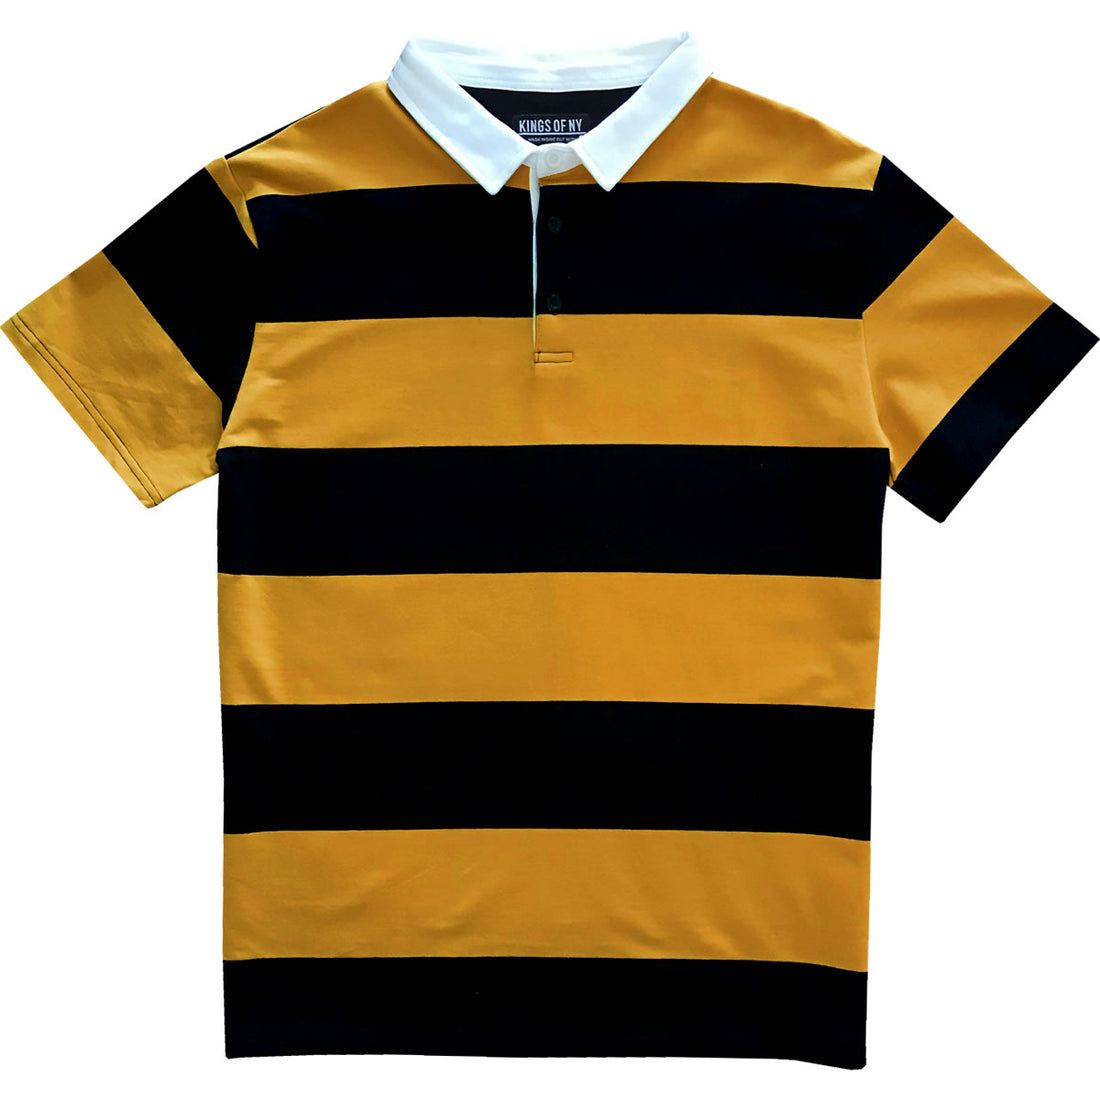 Black and Yellow Short Sleeve Striped Men's Rugby Shirt